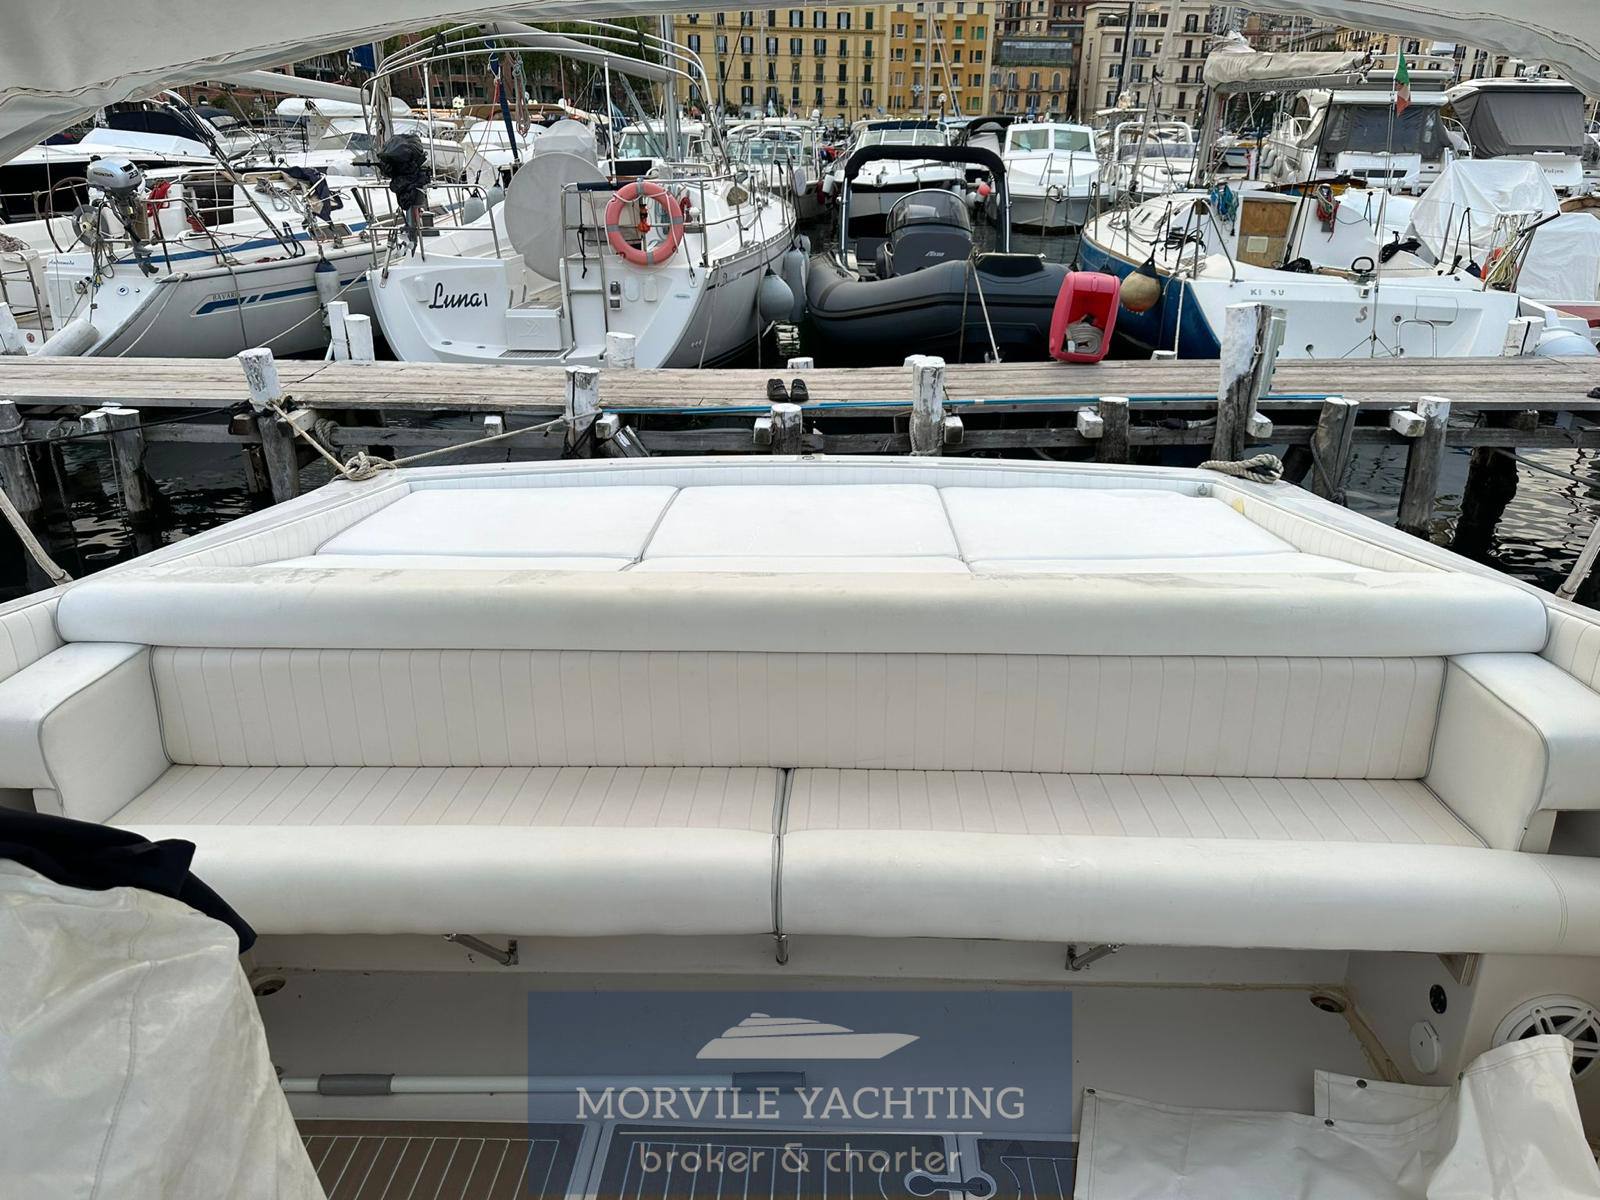 Tornado 38 classic Motor boat used for sale